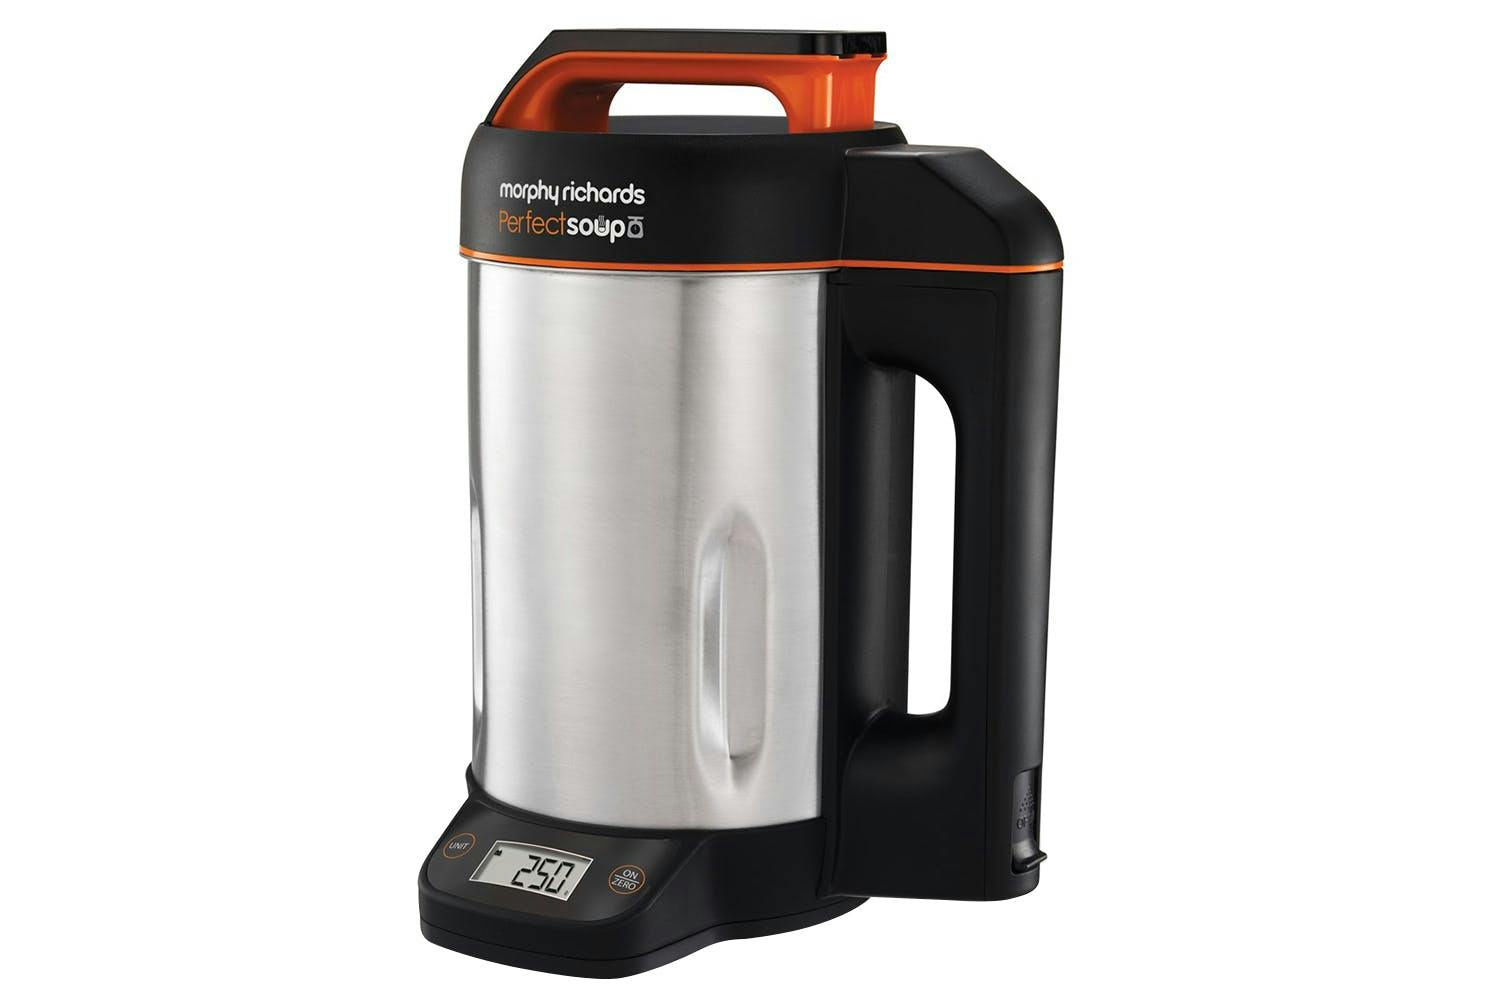 Morphy Richards Soup Maker - Wholesome Ireland